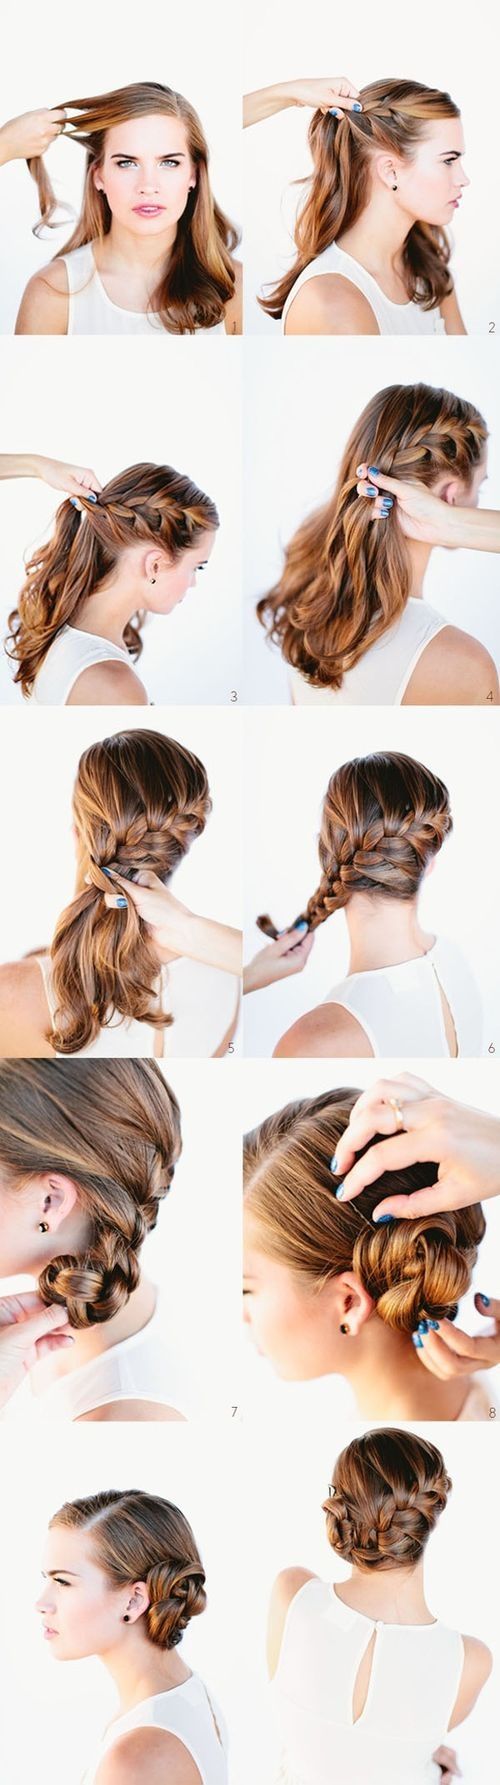 15 Stylish Mermaid Hairstyles to Pair Your Looks